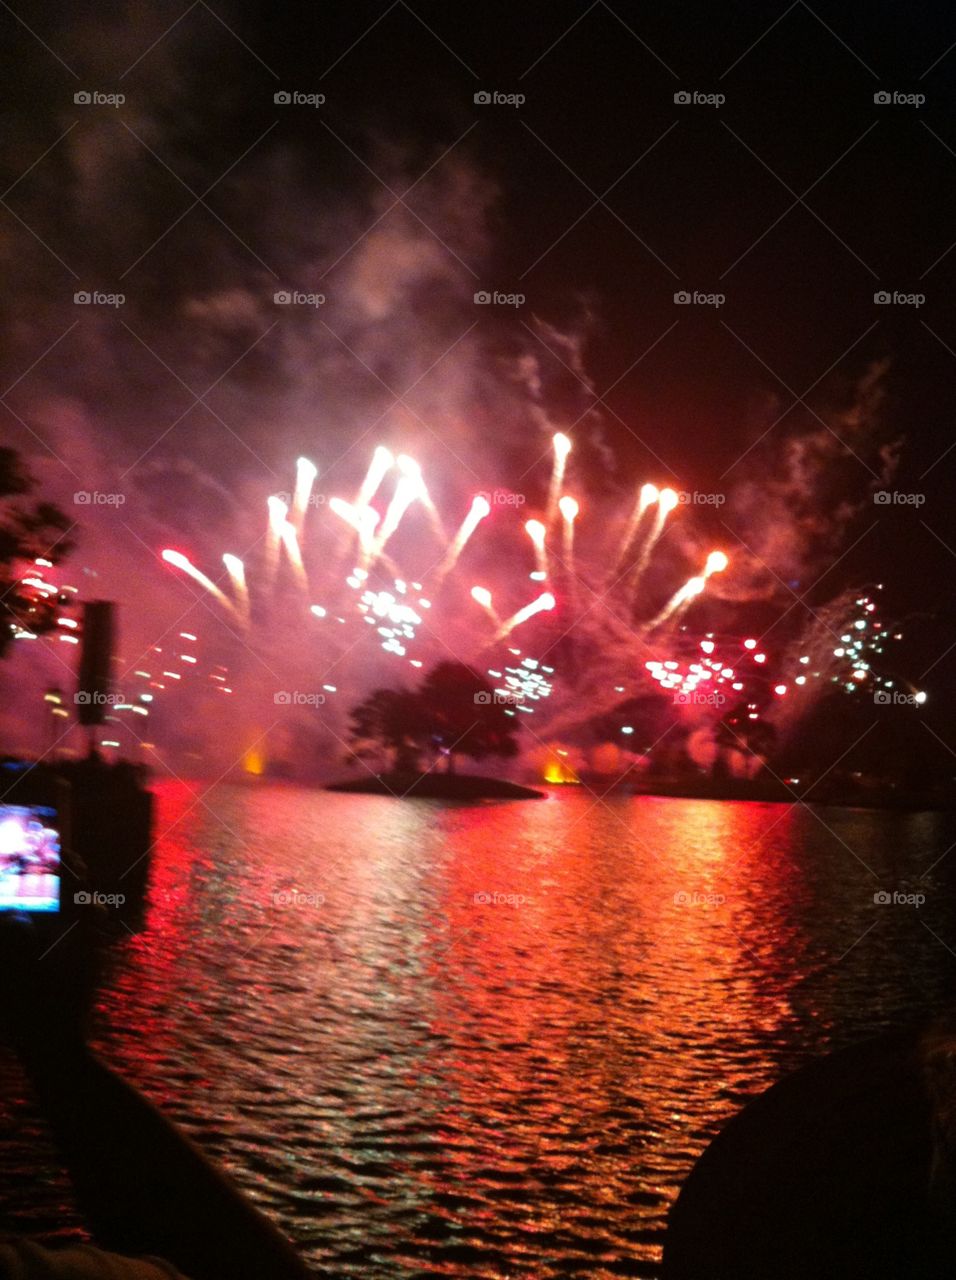 Fireworks . Photo taken at Epcot on family vacation 